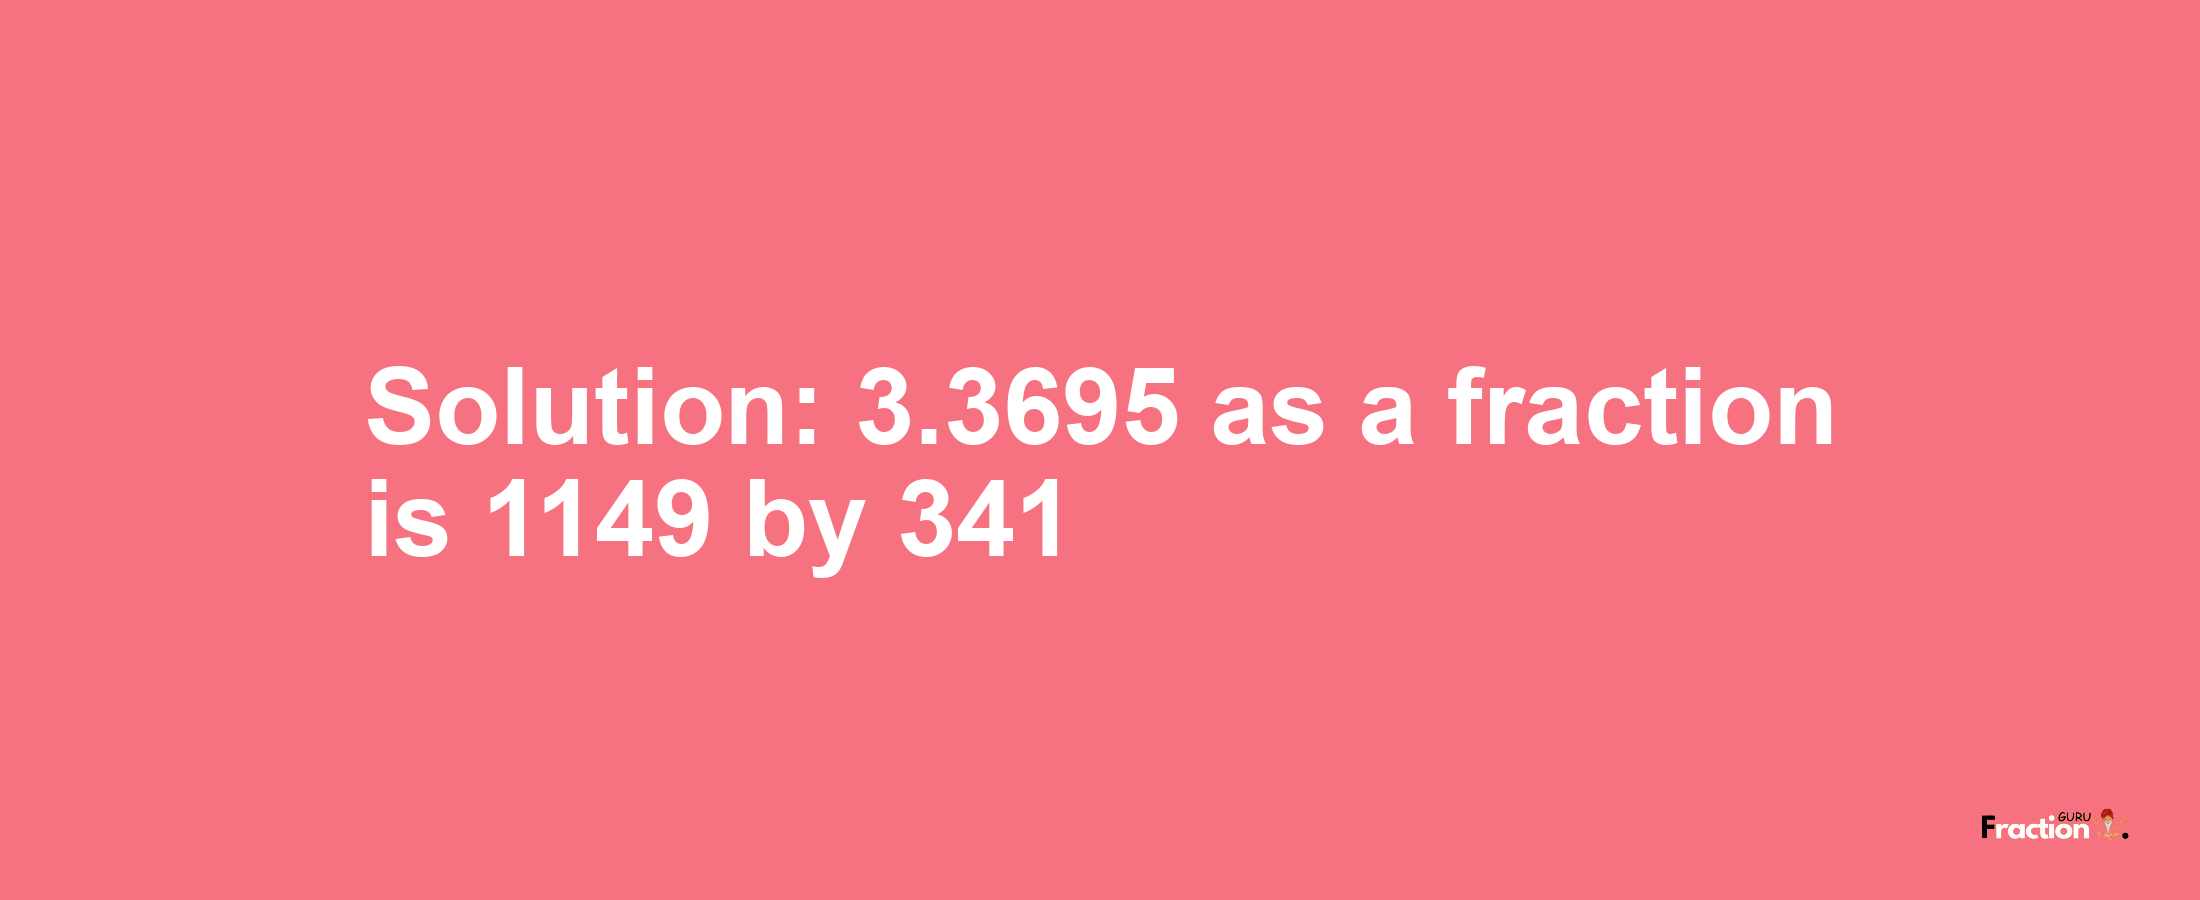 Solution:3.3695 as a fraction is 1149/341